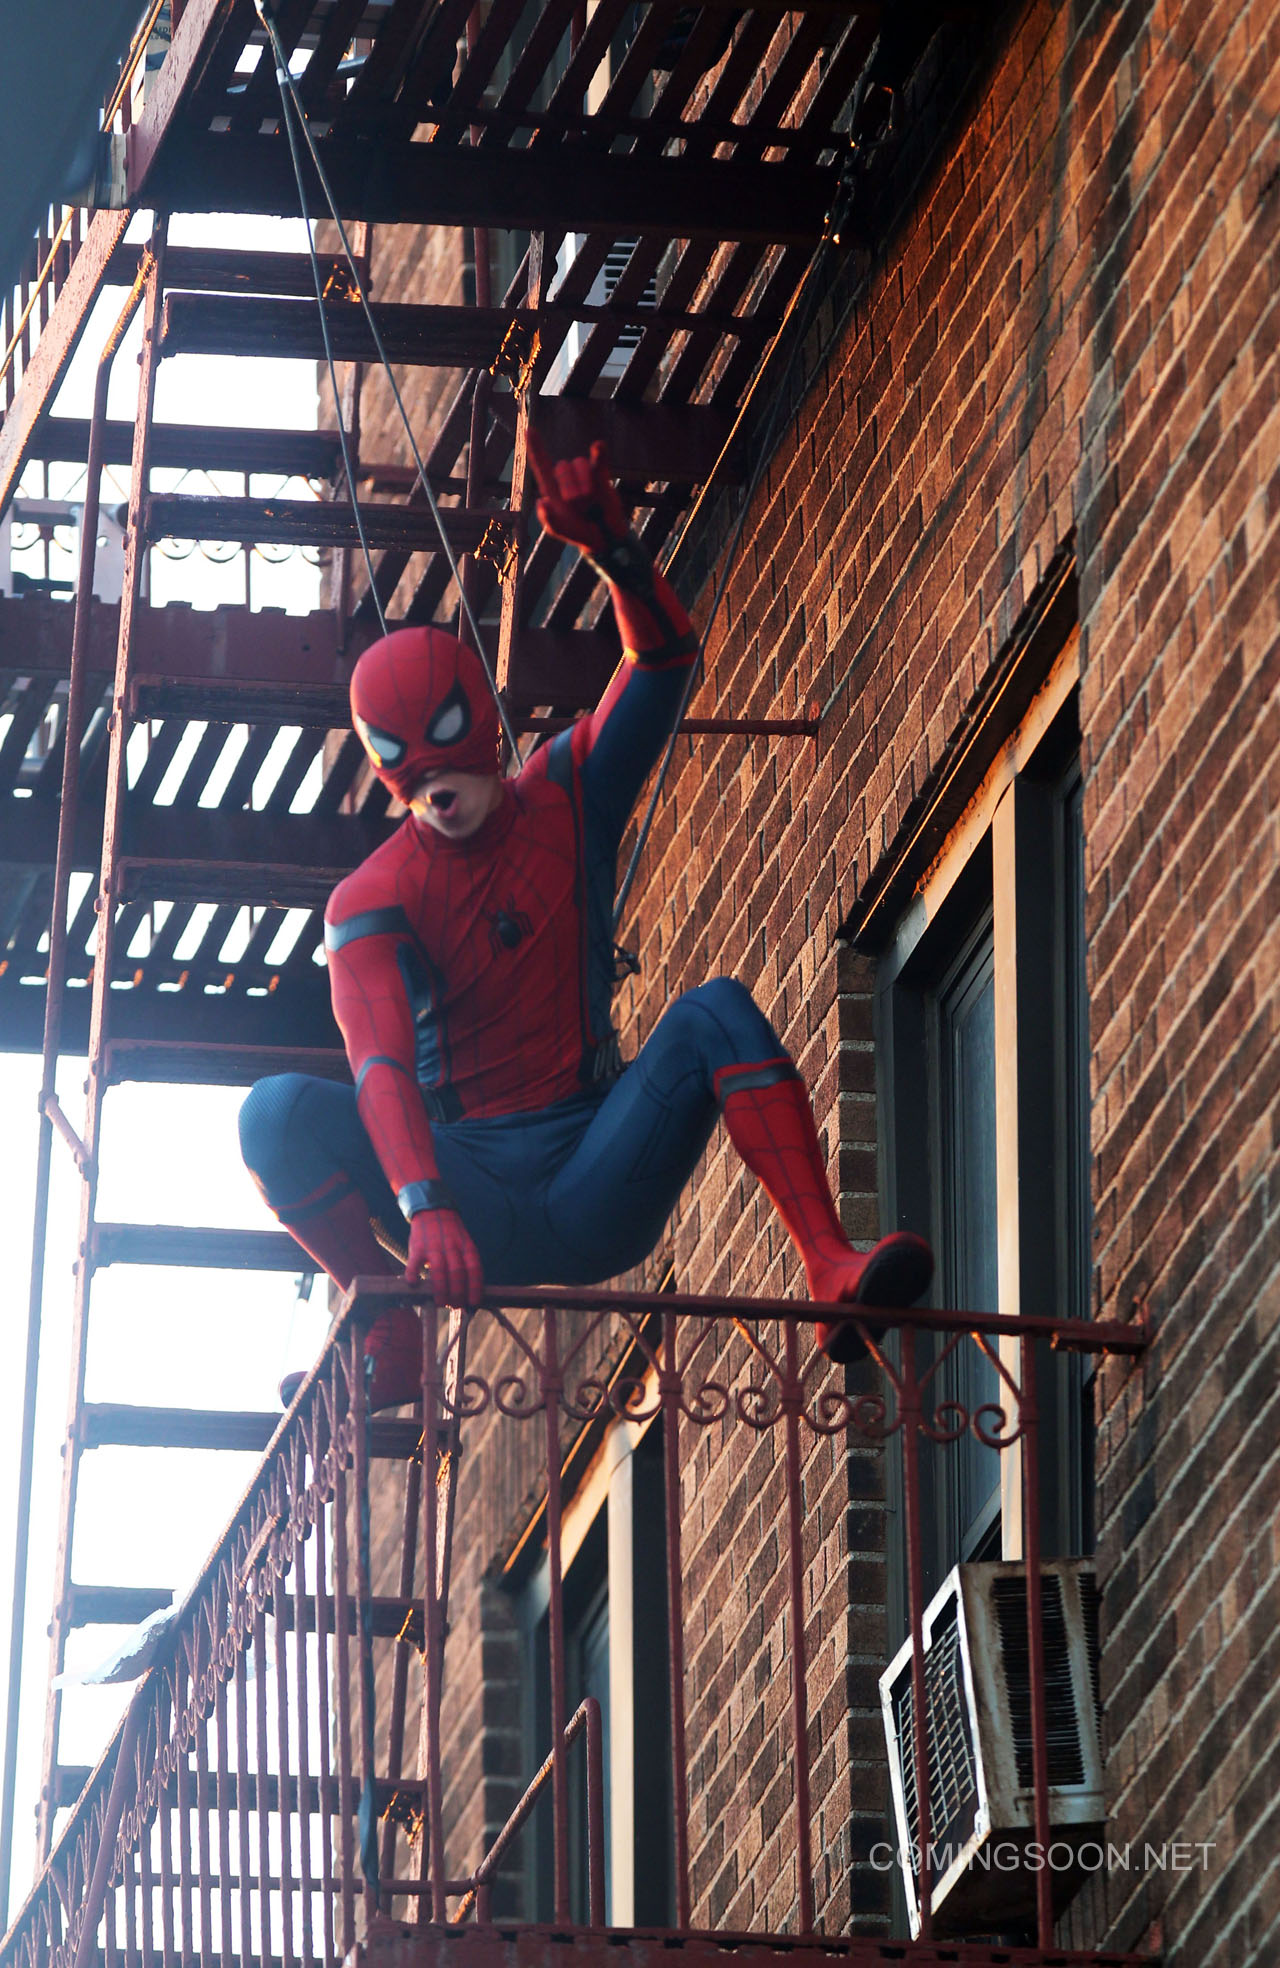 New Photos from the Spider-Man Filming in New York!